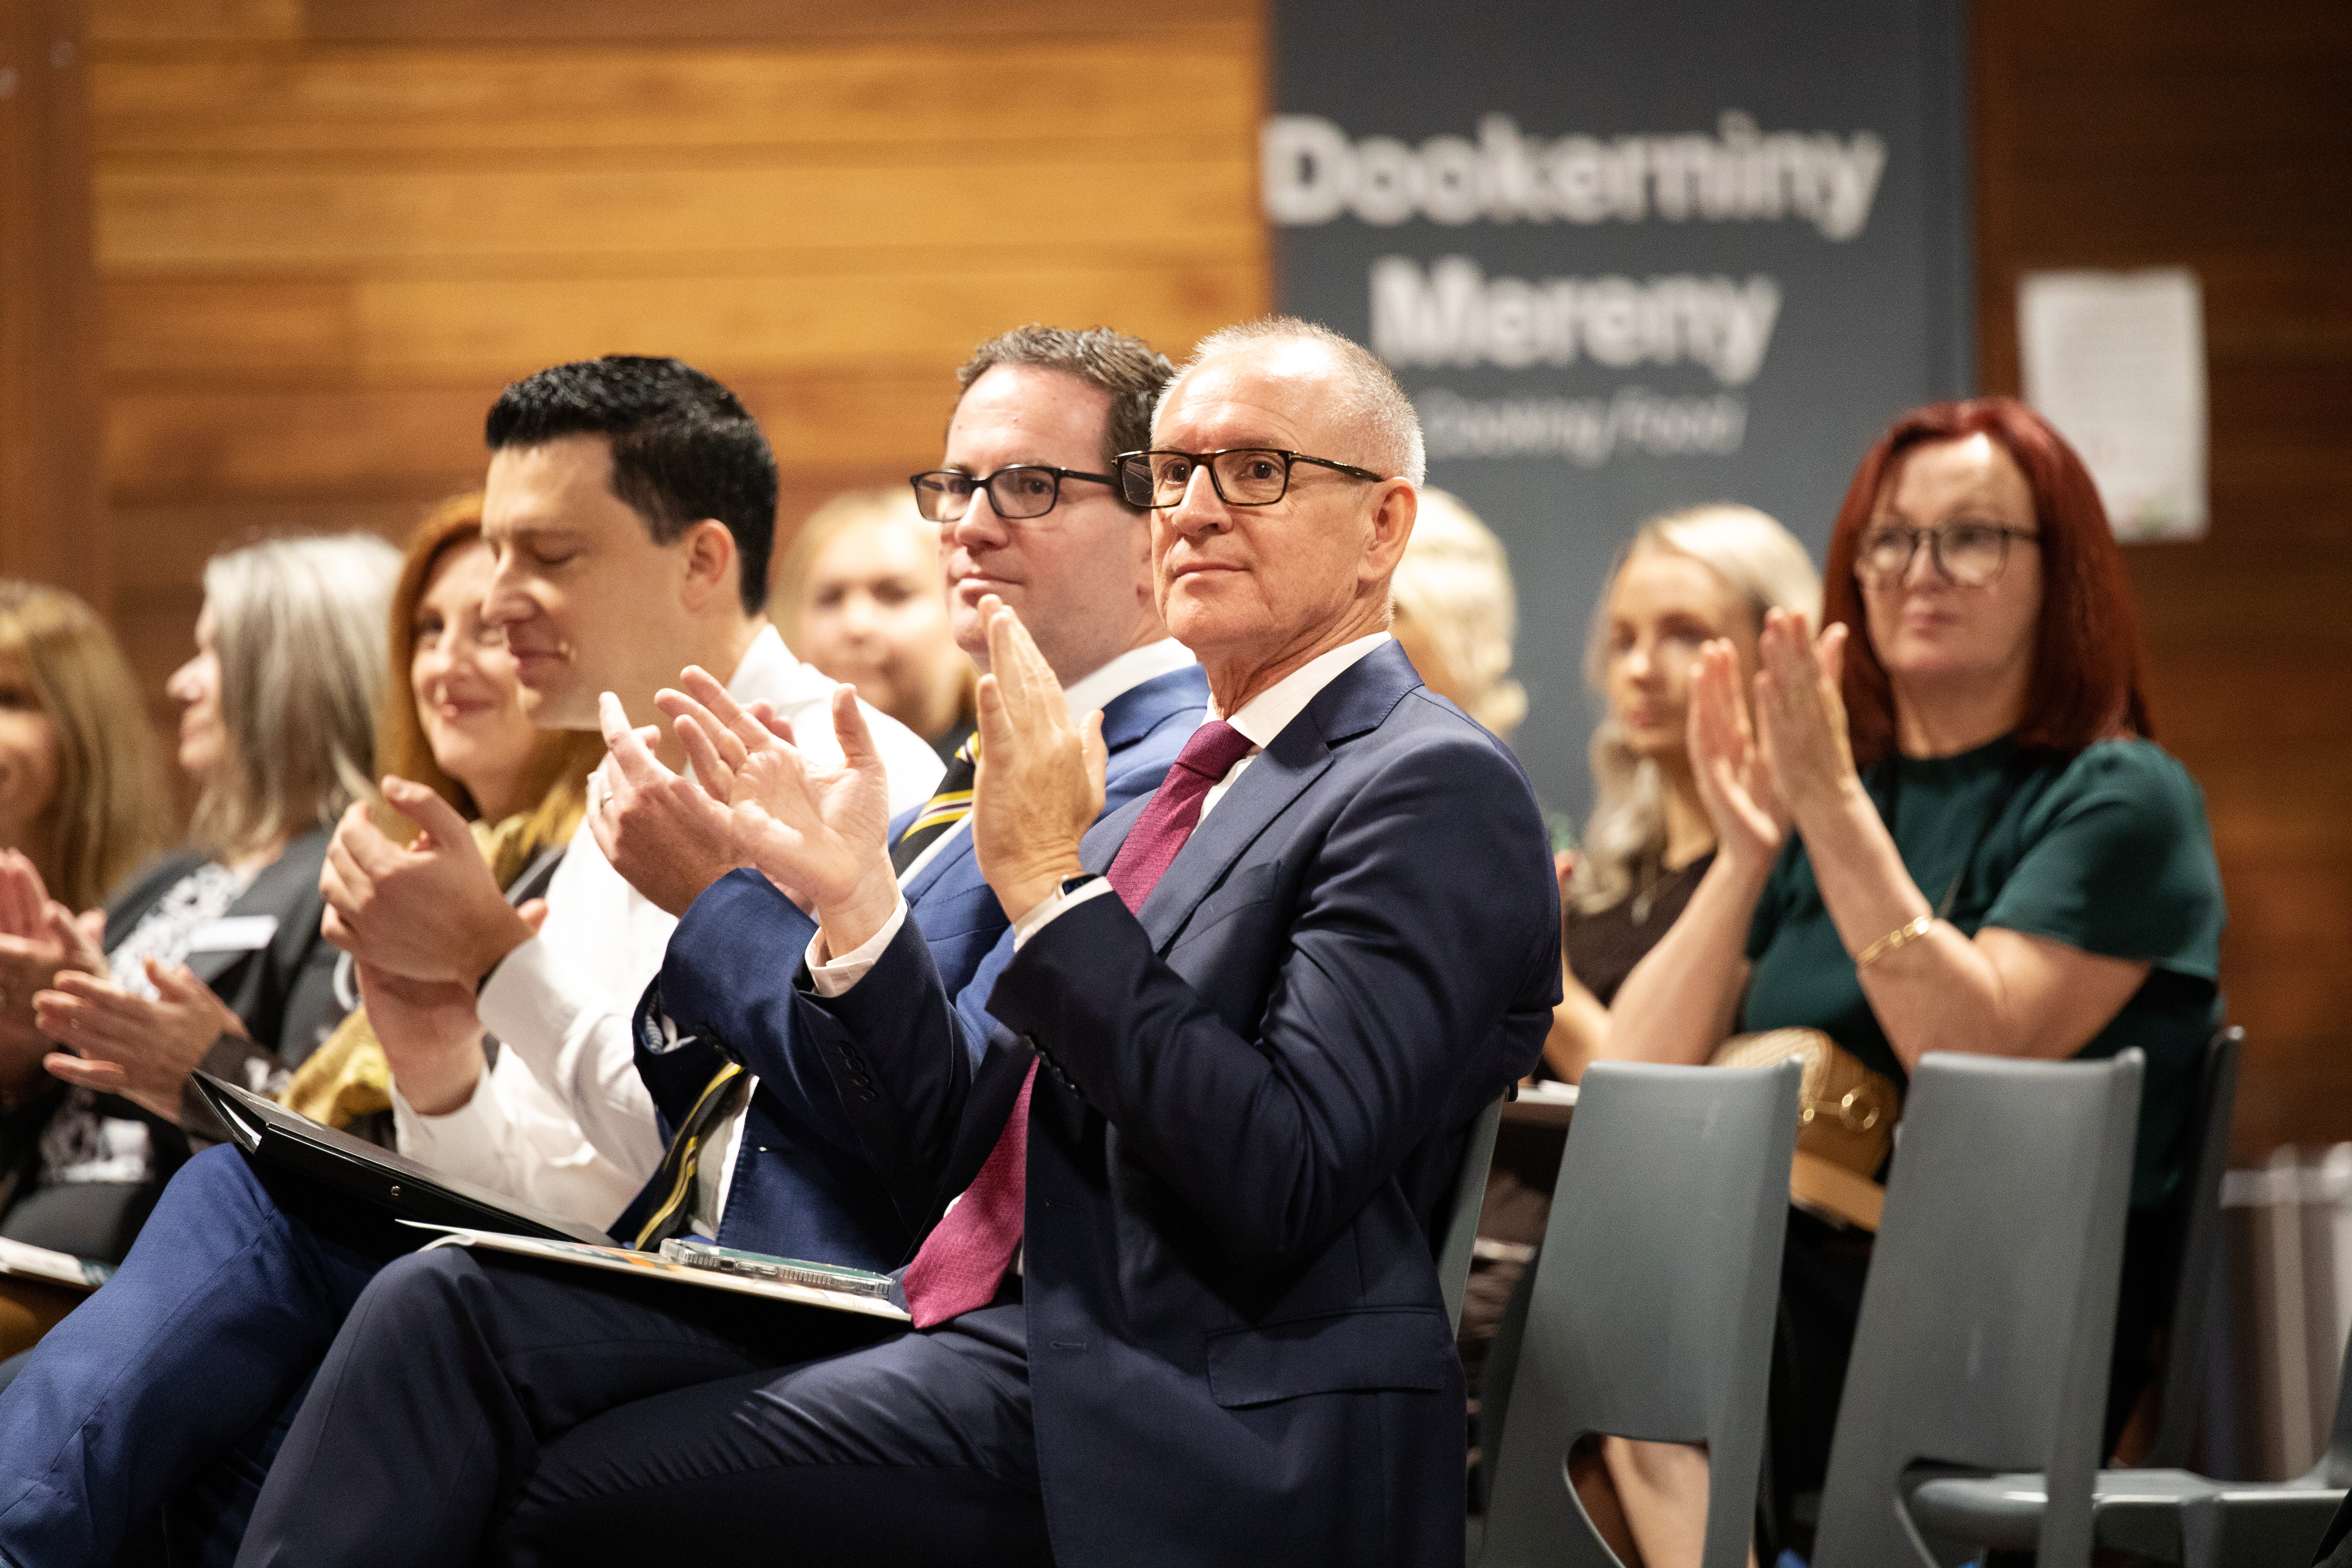 Minderoo Foundation Jay Weatherill and audience members applauding